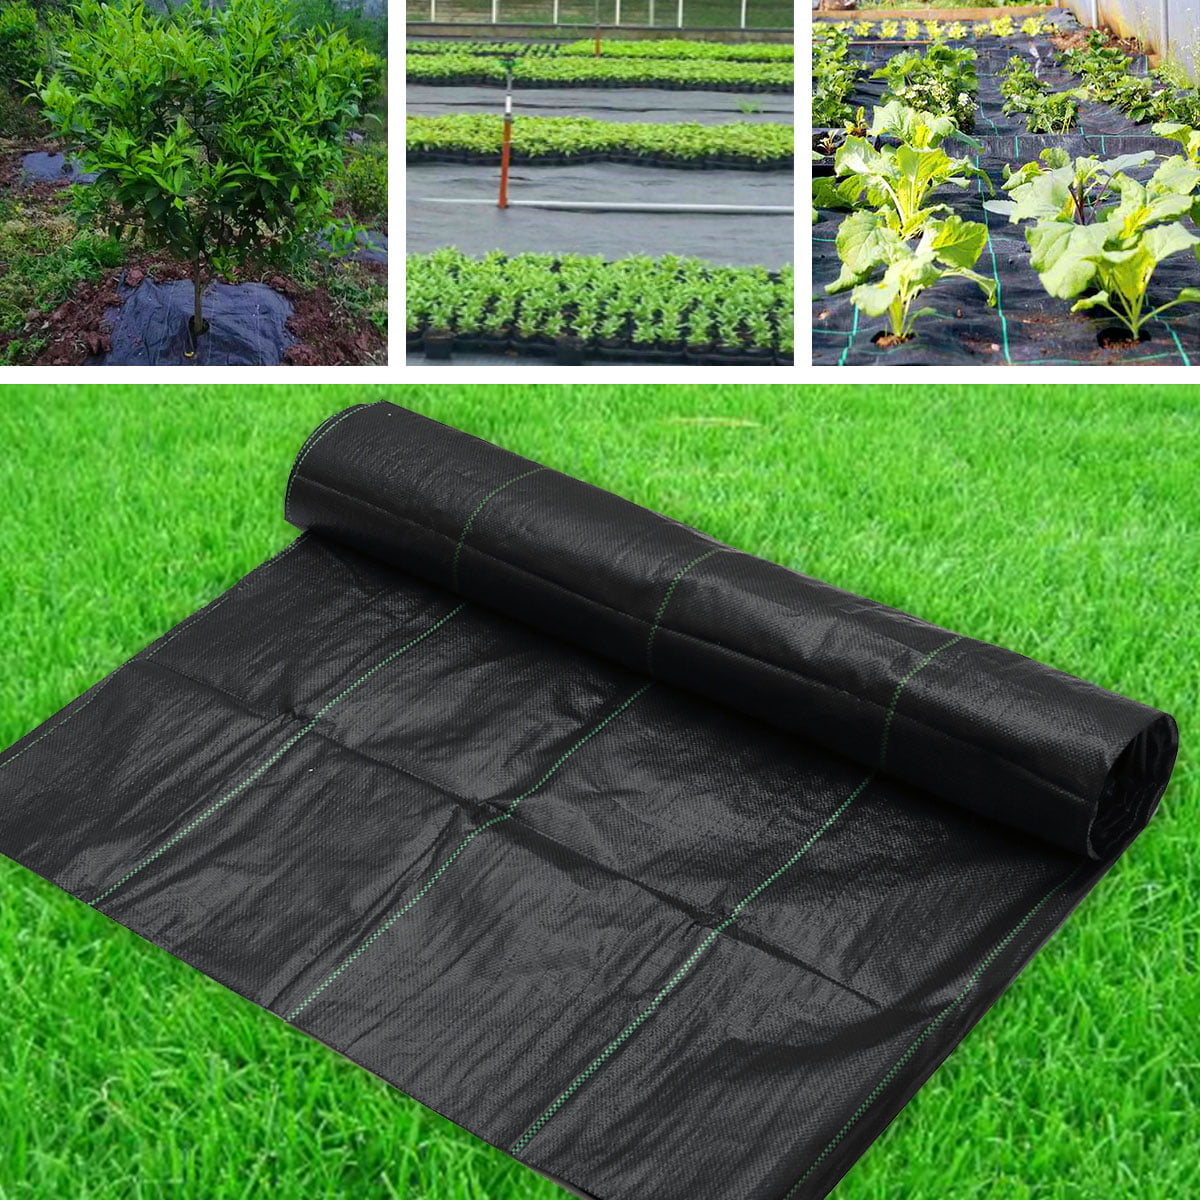 Durable & Heavy-Duty Weed Block Gardening Mat Superior Weed Control 